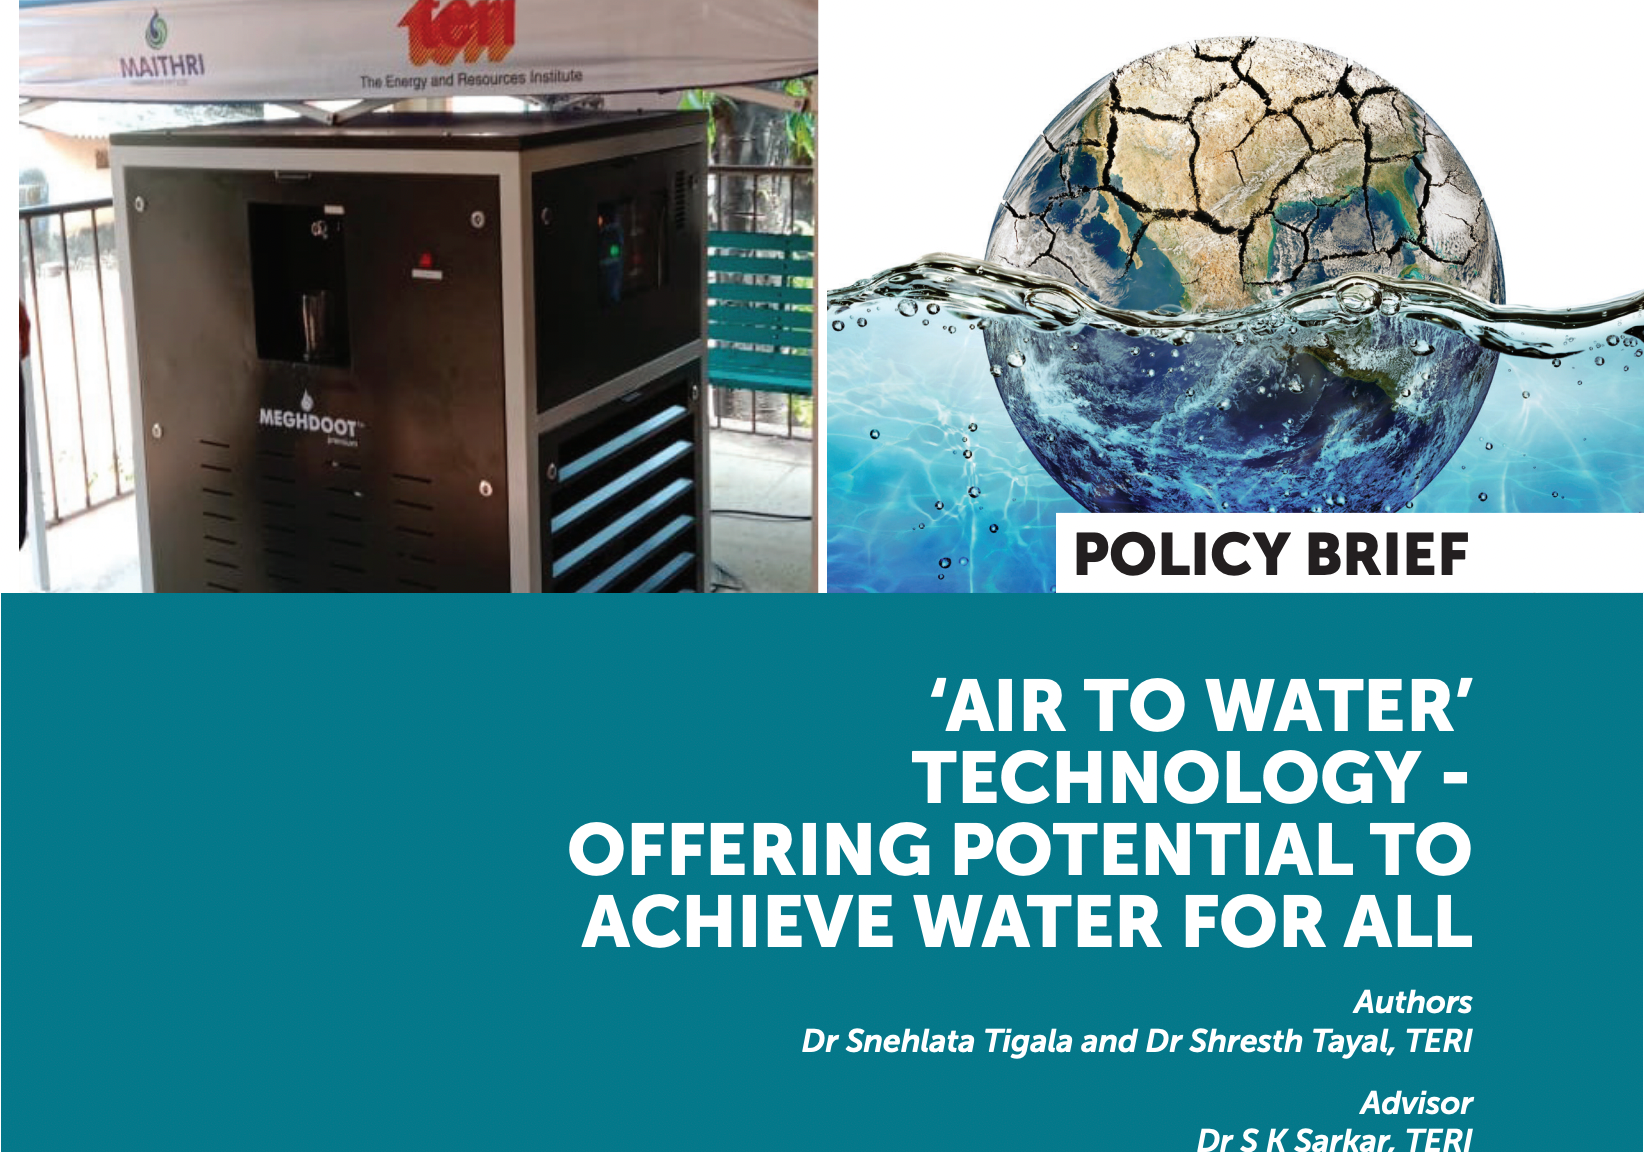 Air to Water Technology - TERI Policy Brief